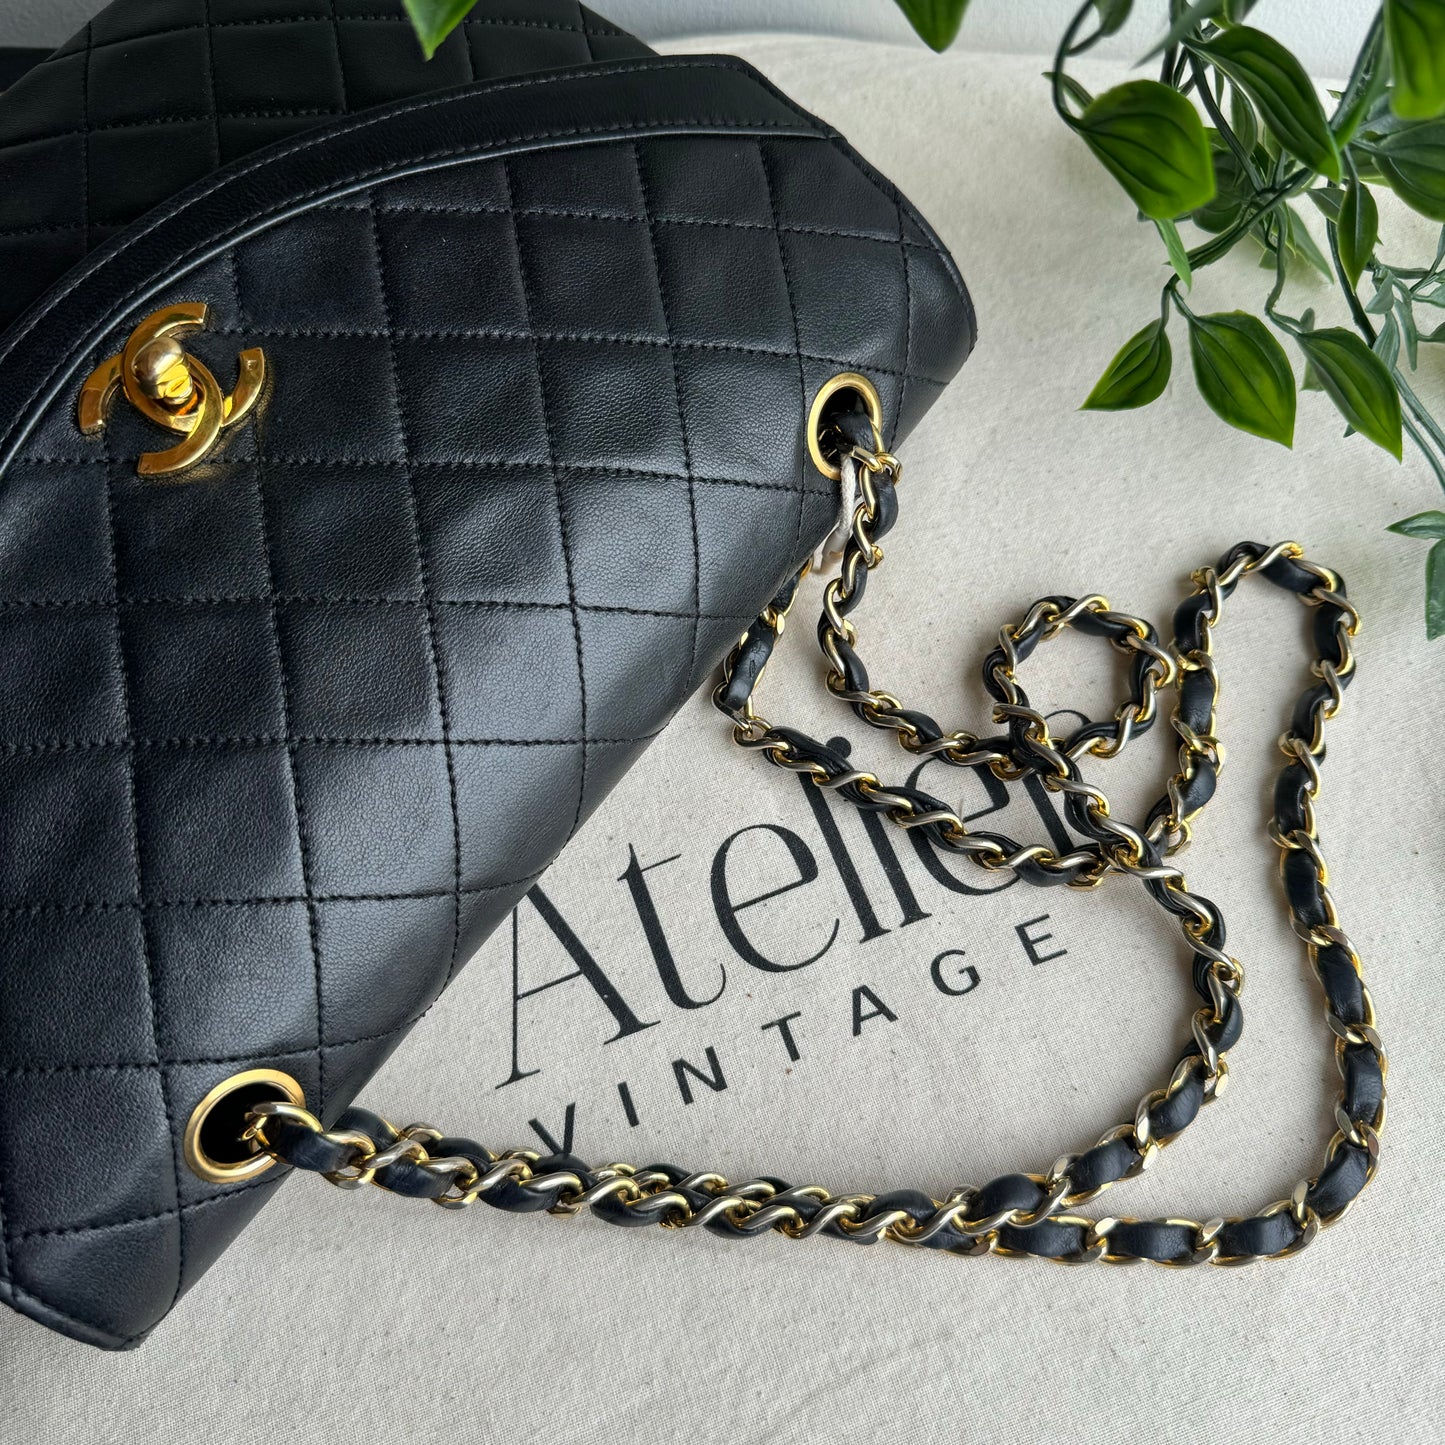 Chanel 1986 Curved Single Flap